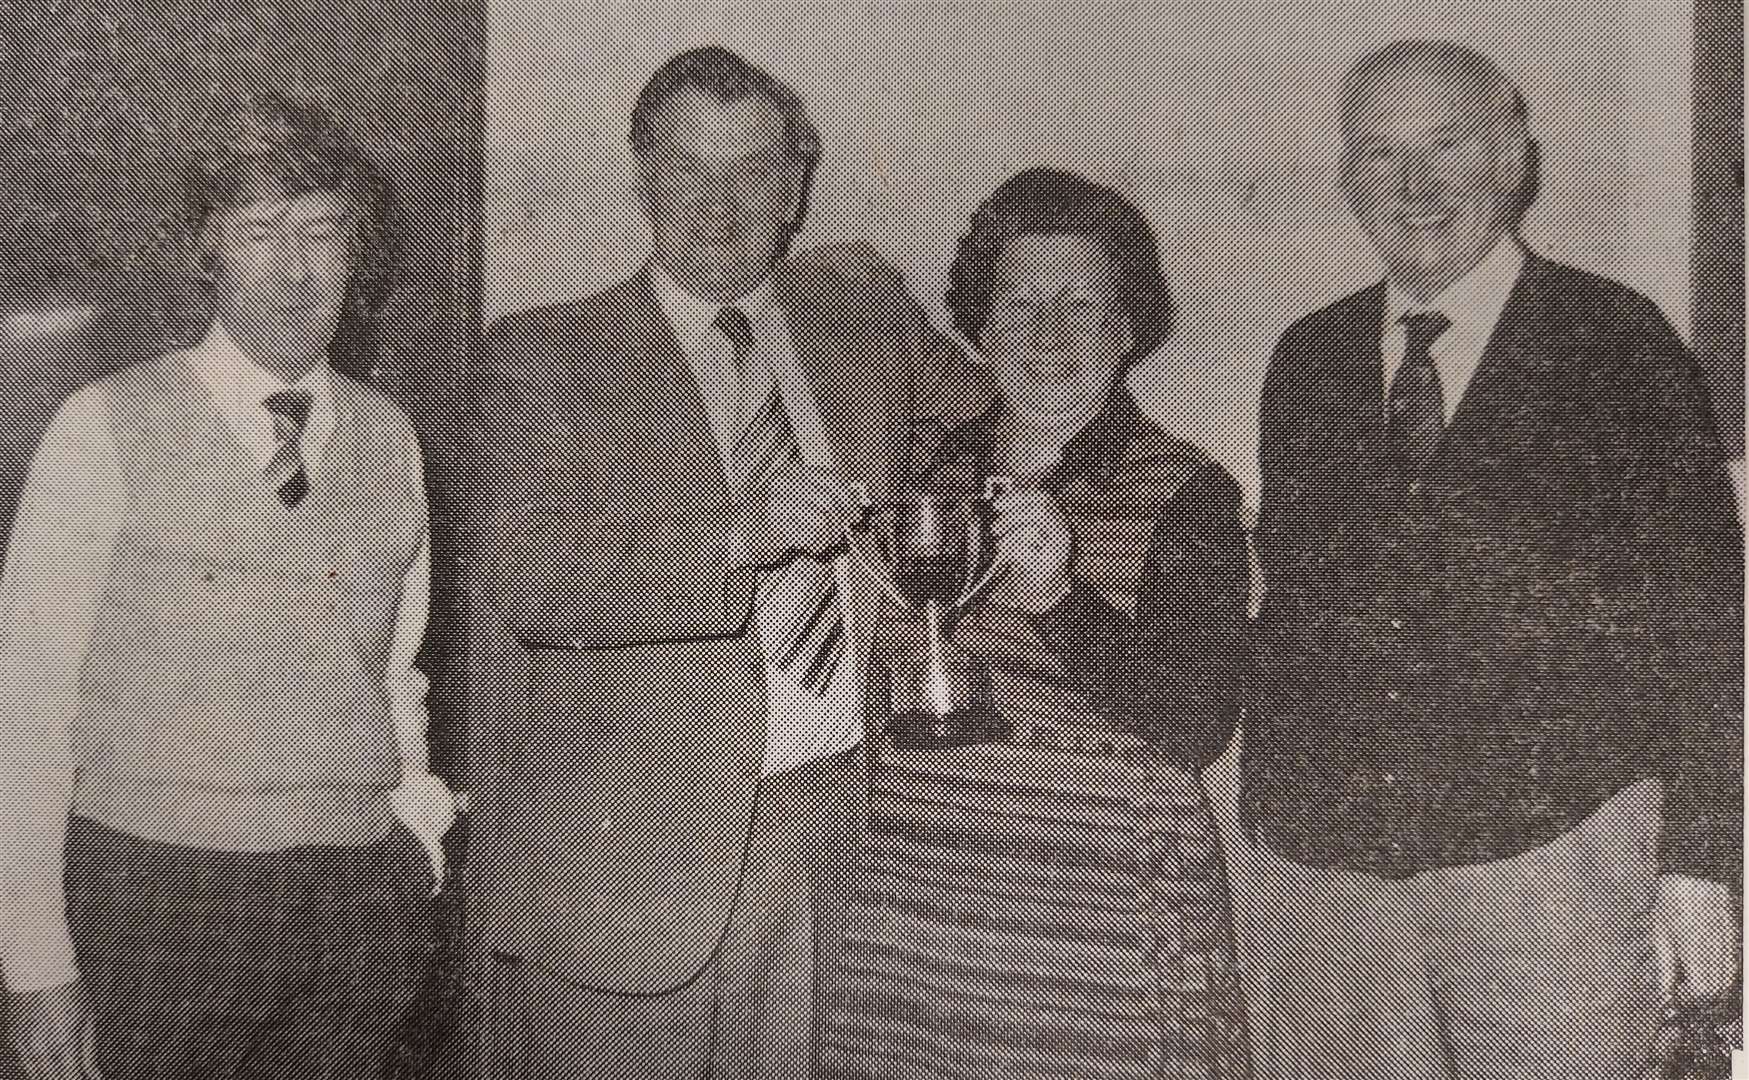 Winners of the Advertiser Cup for winning Division 1 of Donside Bridge League were H Watson, F Chalmers, G Patterson and N McEwan. (Inverurie Advertiser 1979)